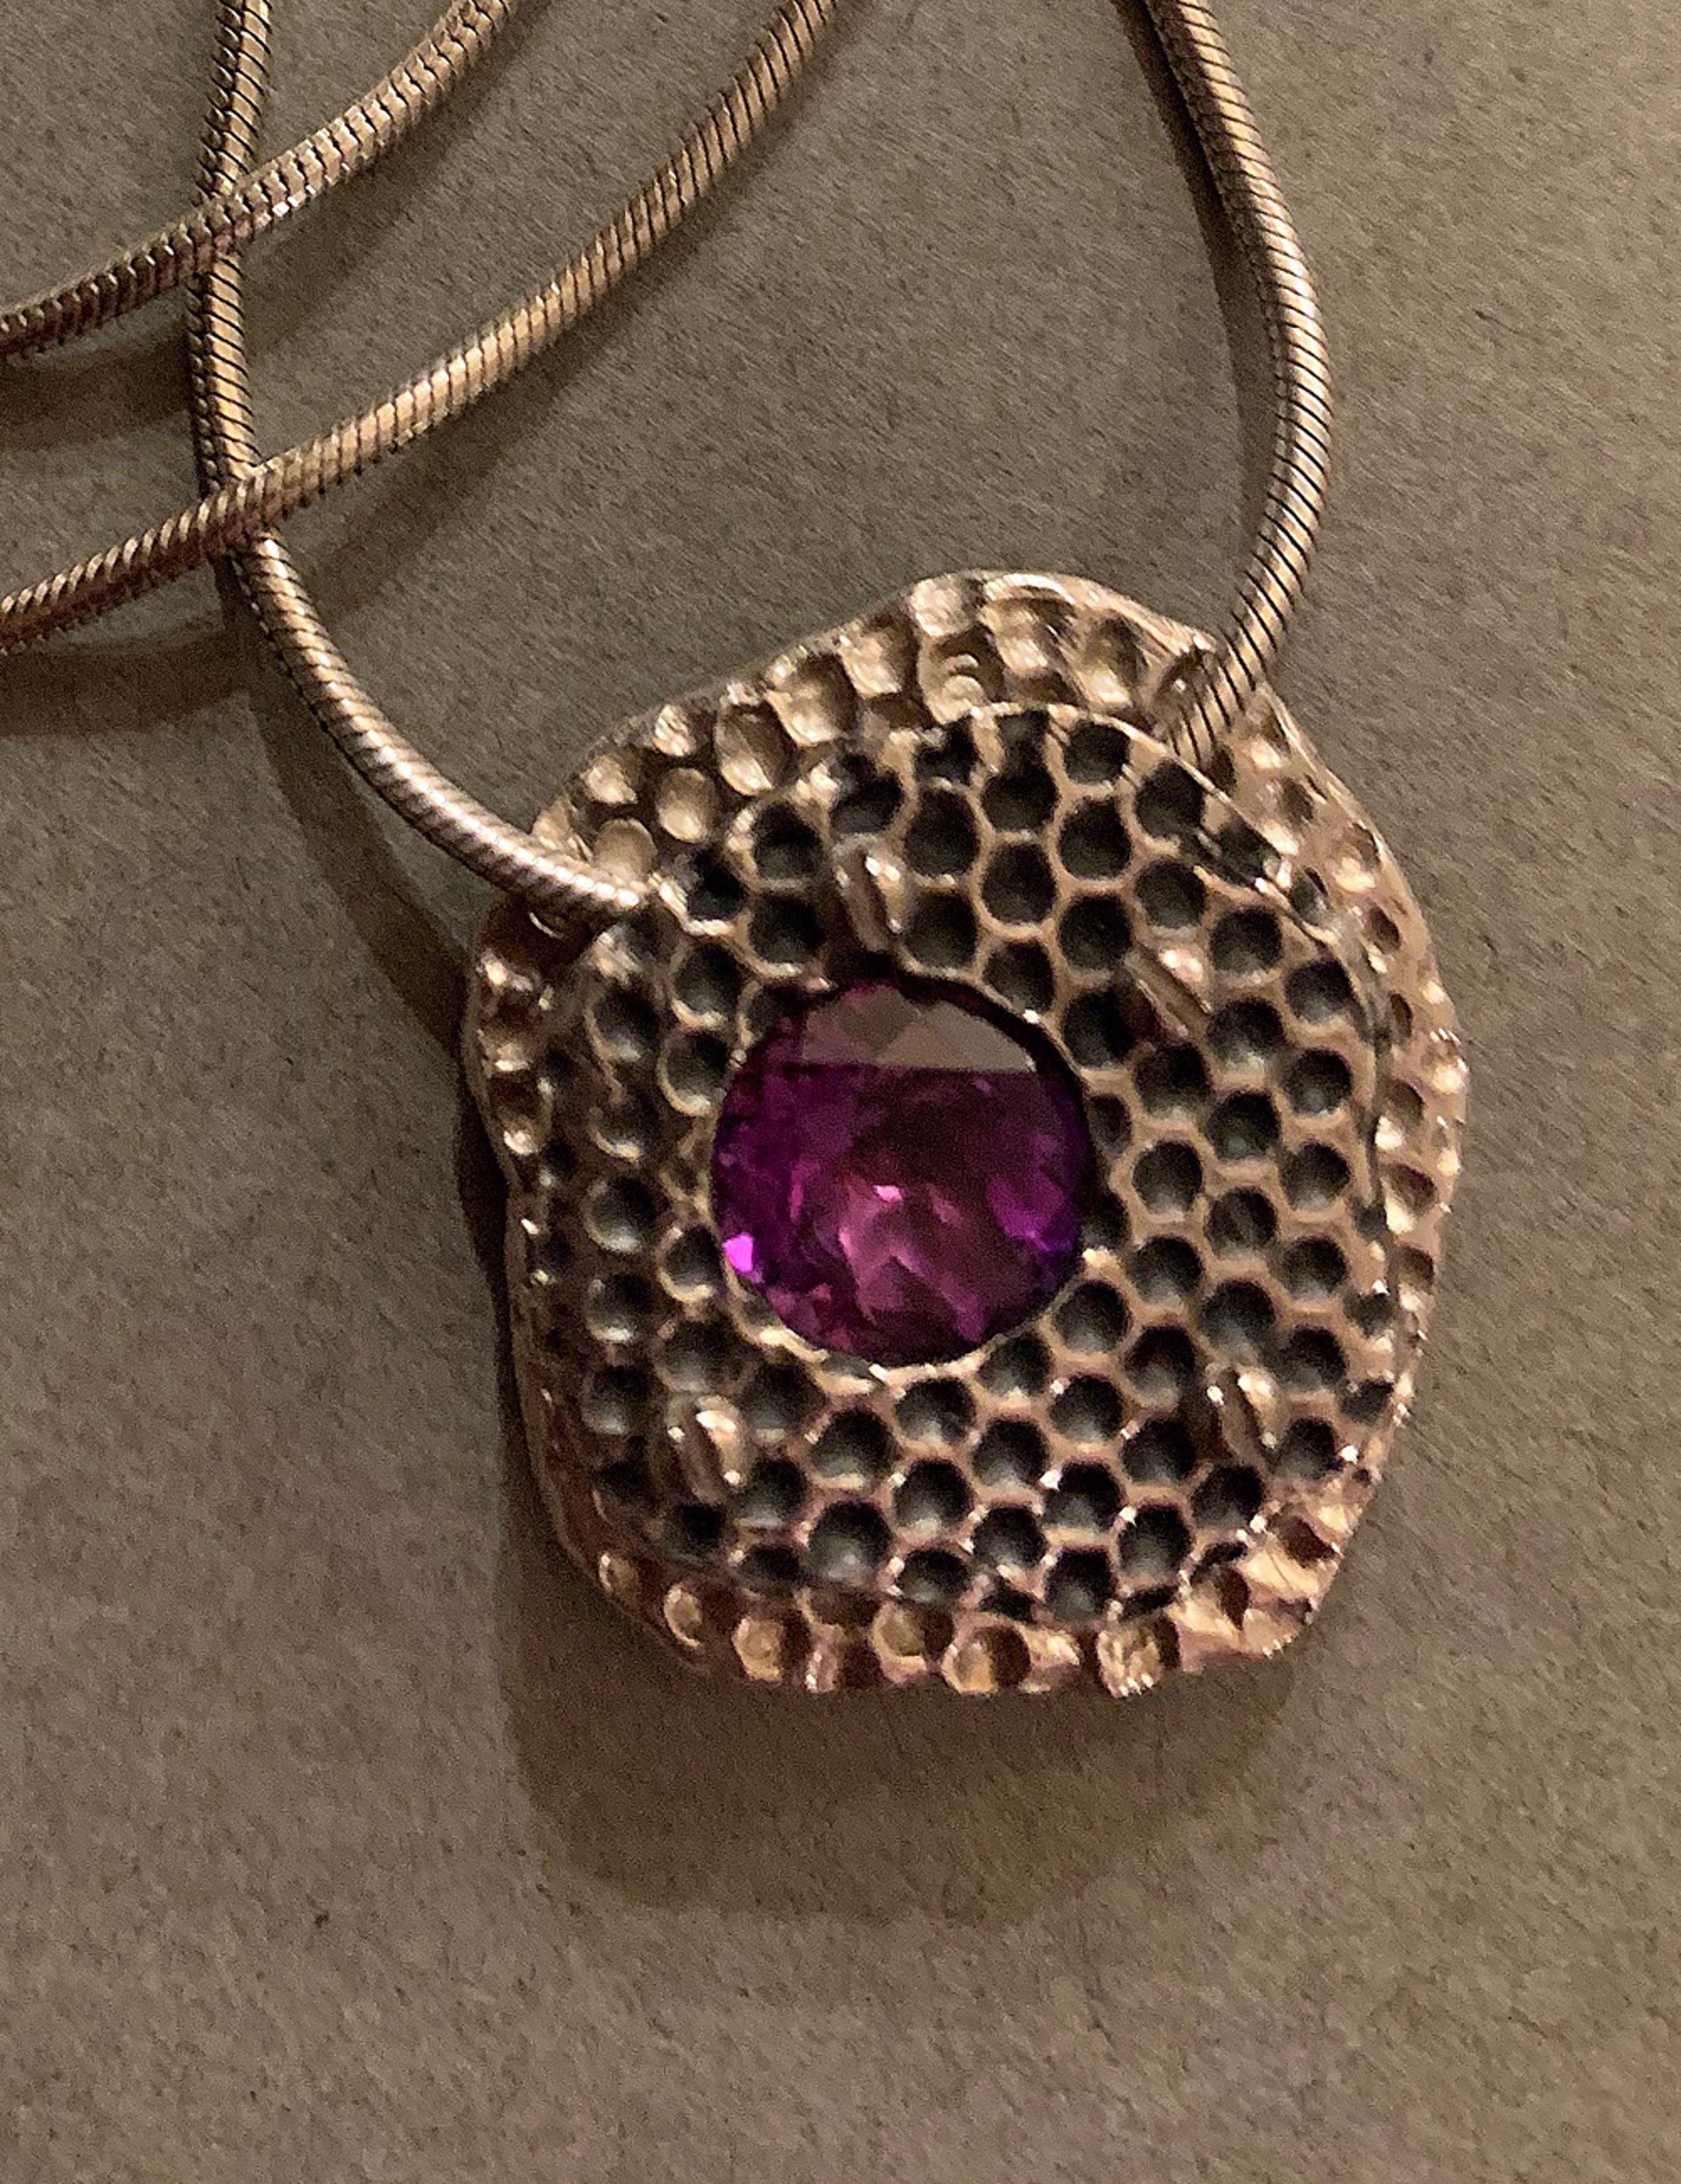 Pendant - Captured stone with purple cz 16" chain in sterling silver  ADC007 by Annette Campbell